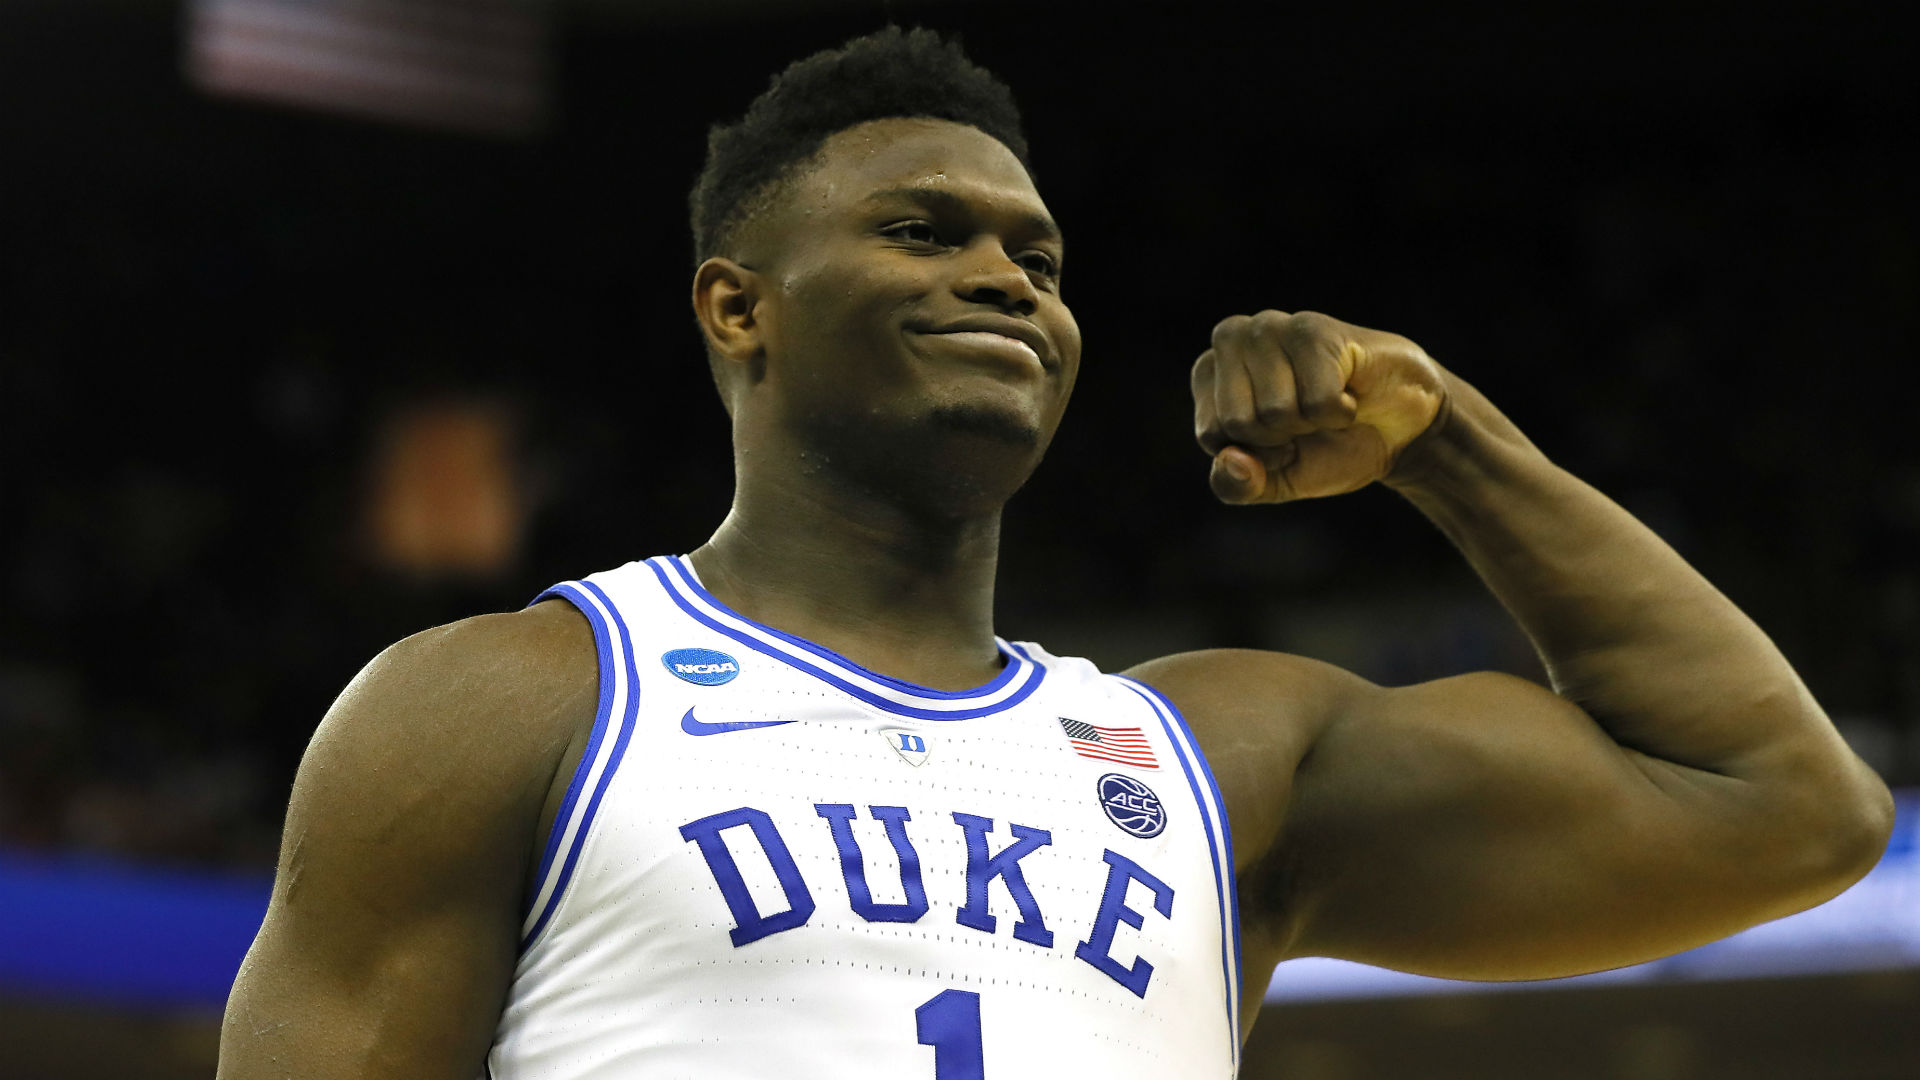 NBA Draft 2019: What are the best player comparisons for Zion Williamson? | NBA.com ...